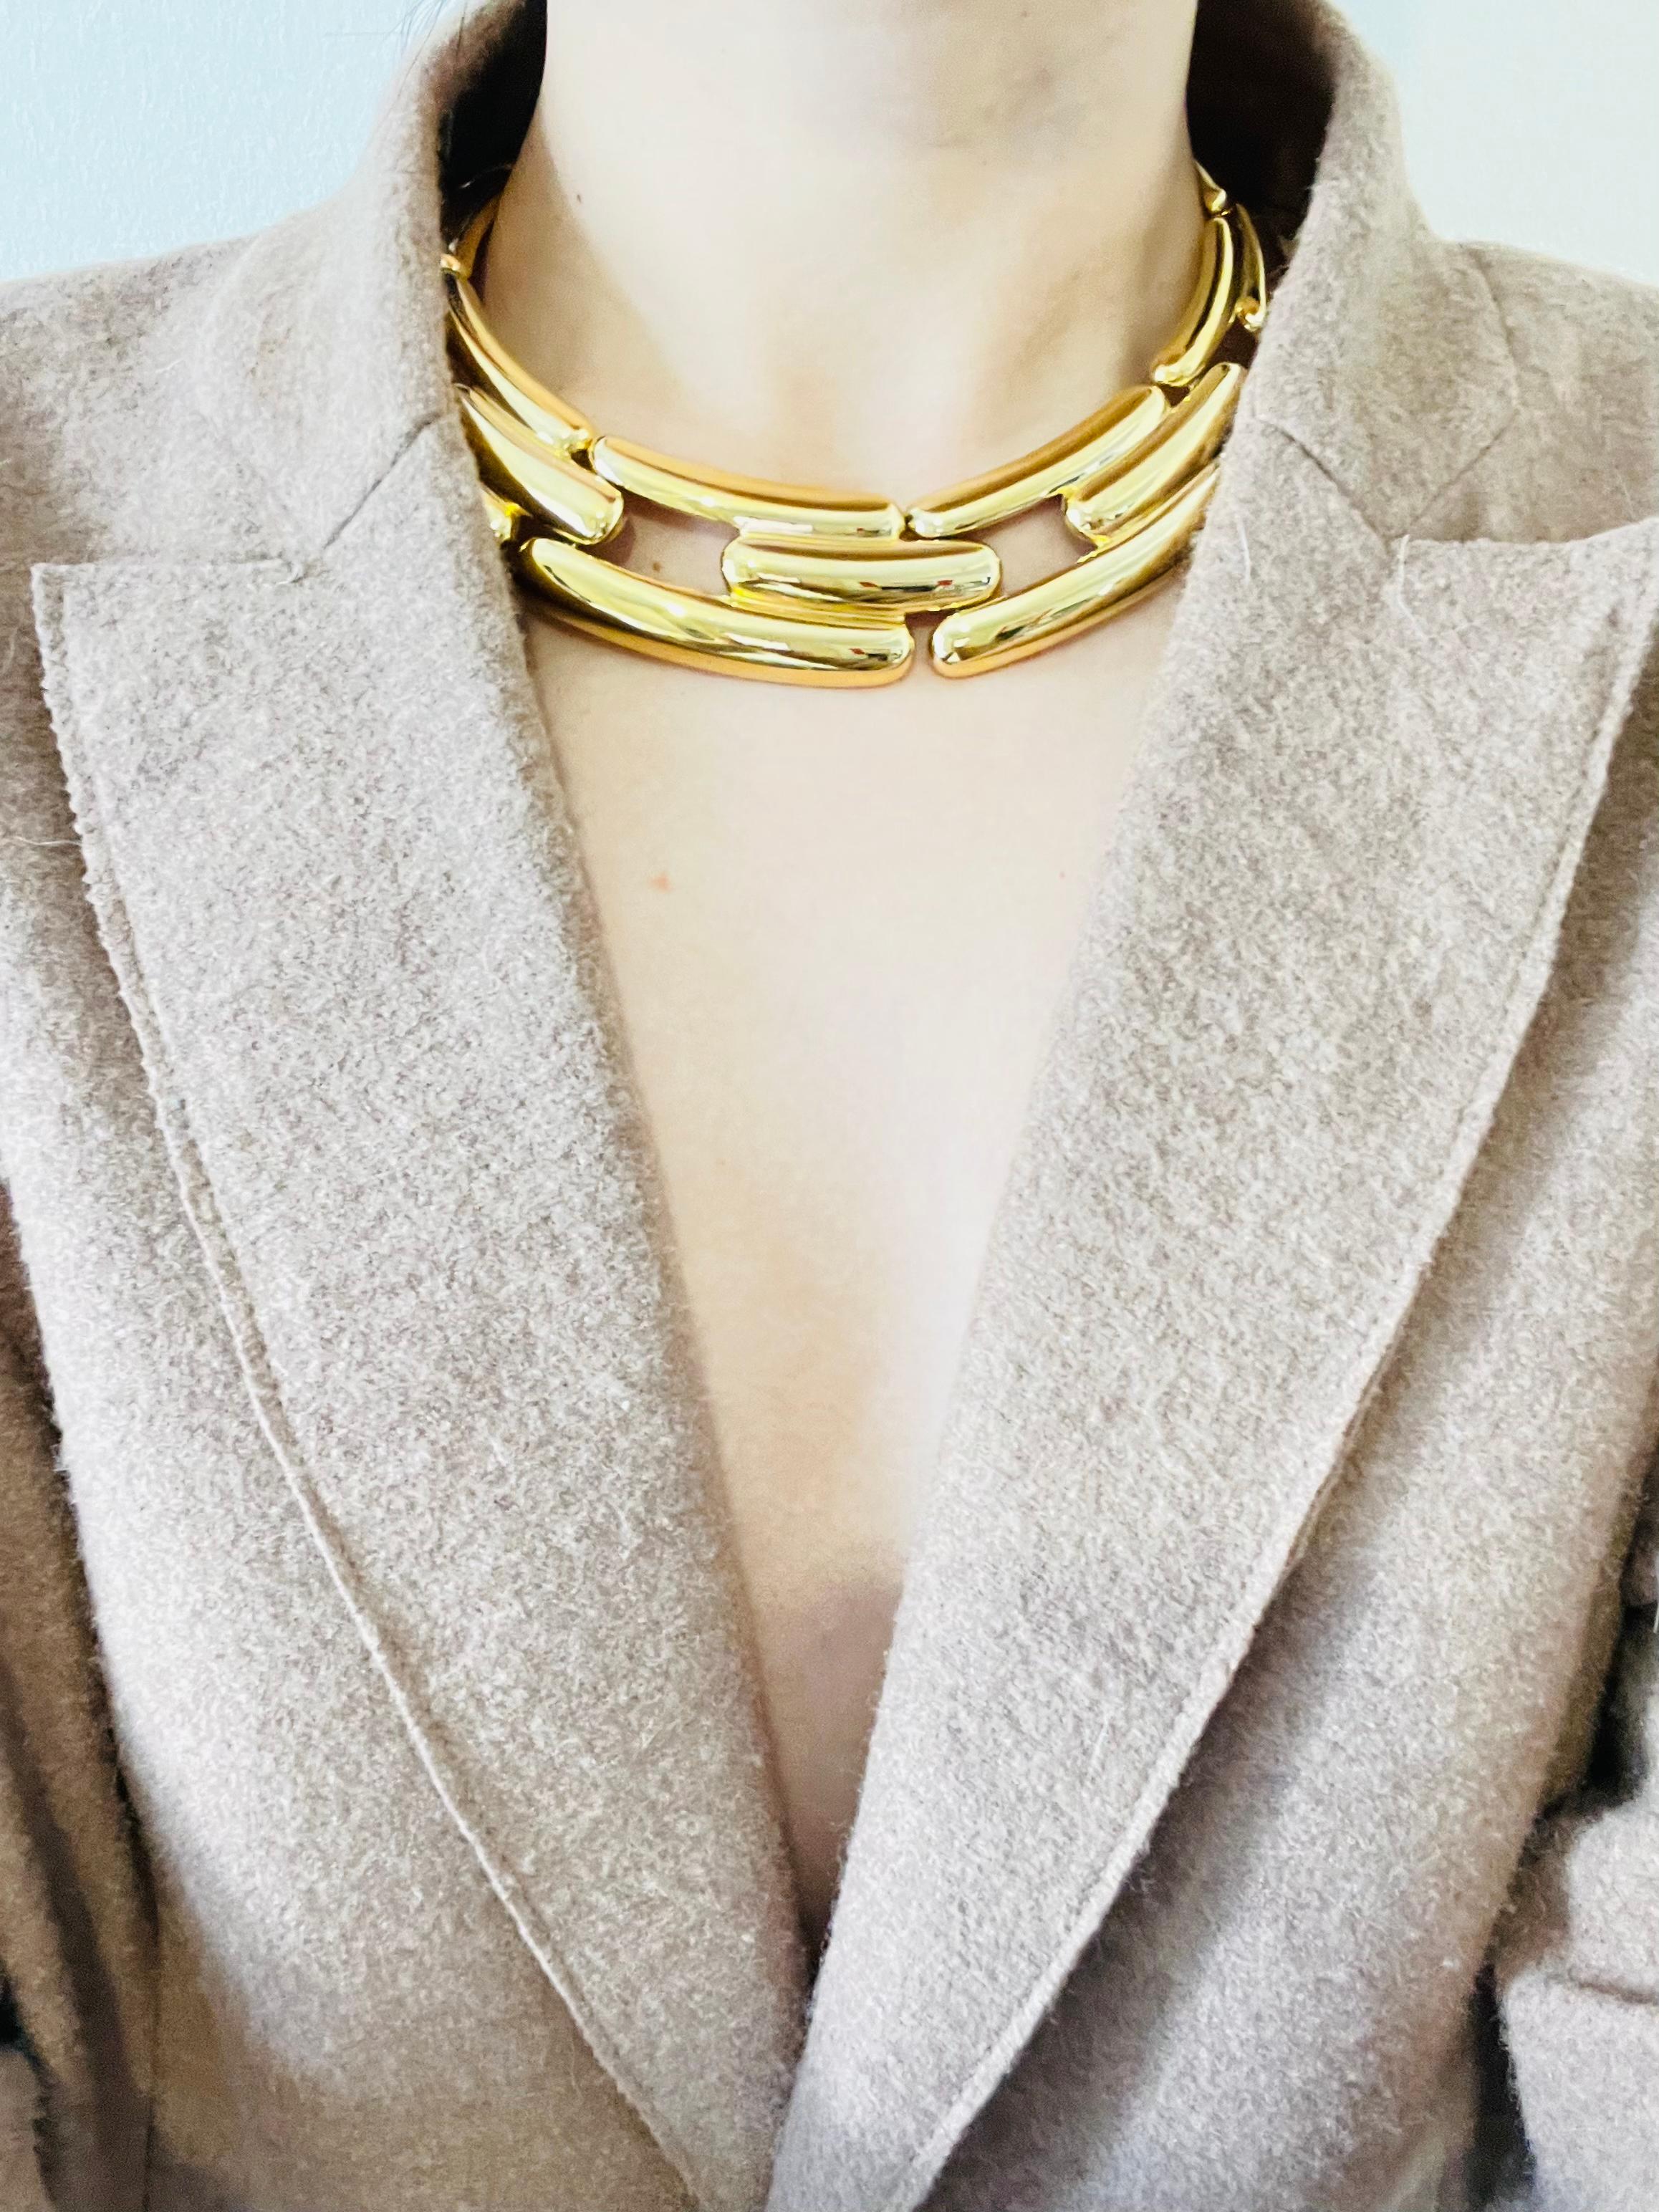 Givenchy Vintage 1980s Chunky Watch Link Interlock Gold Collar Choker Necklace In Excellent Condition For Sale In Wokingham, England